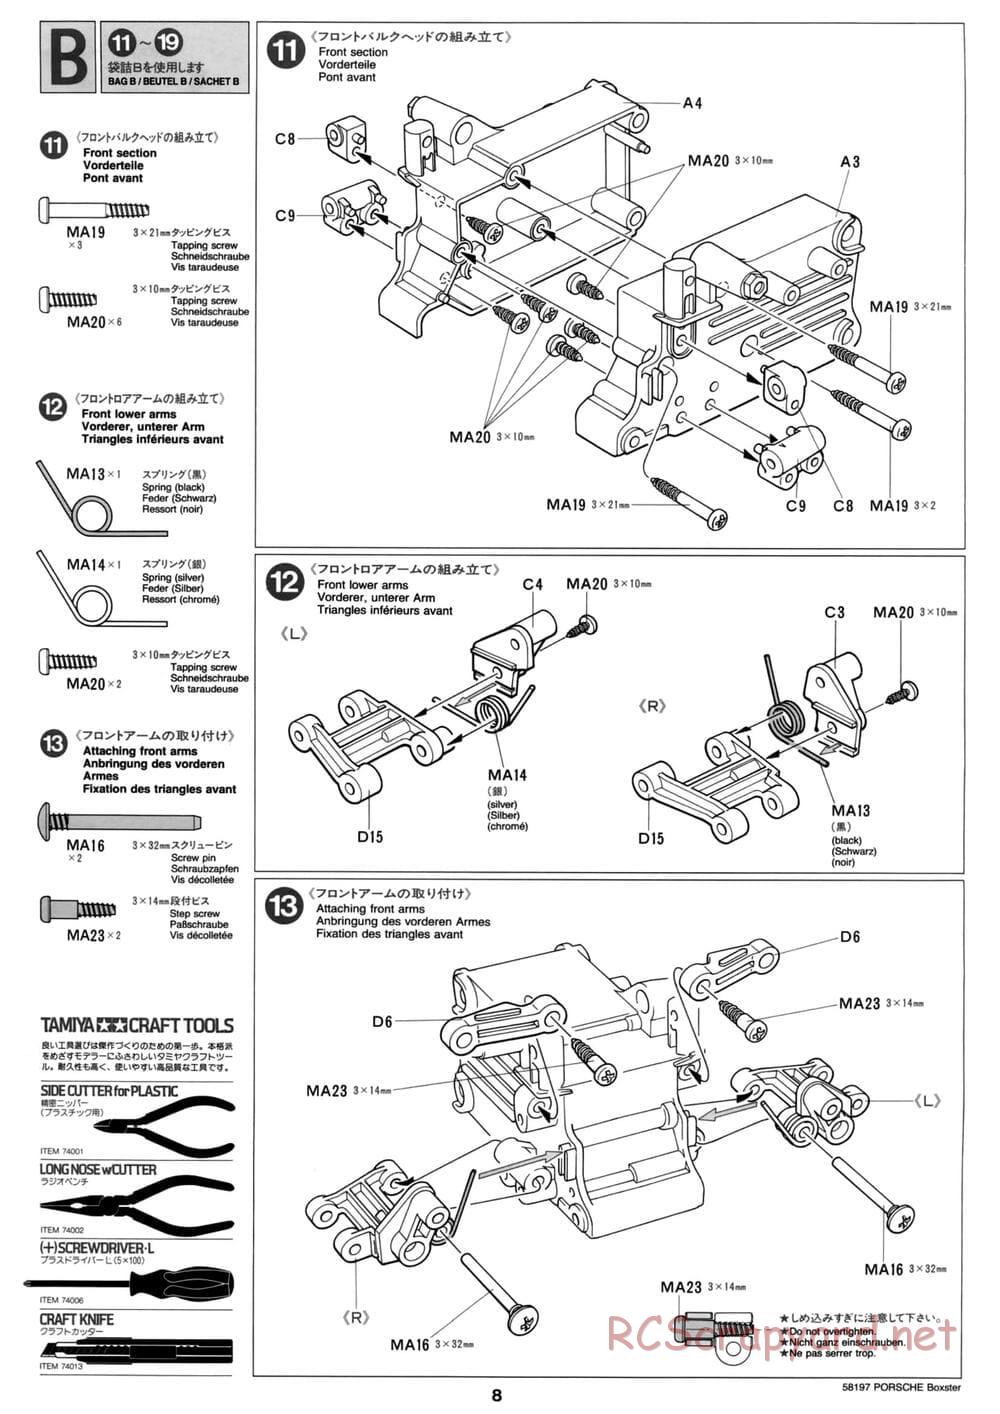 Tamiya - Porsche Boxster - M02L Chassis - Manual - Page 8